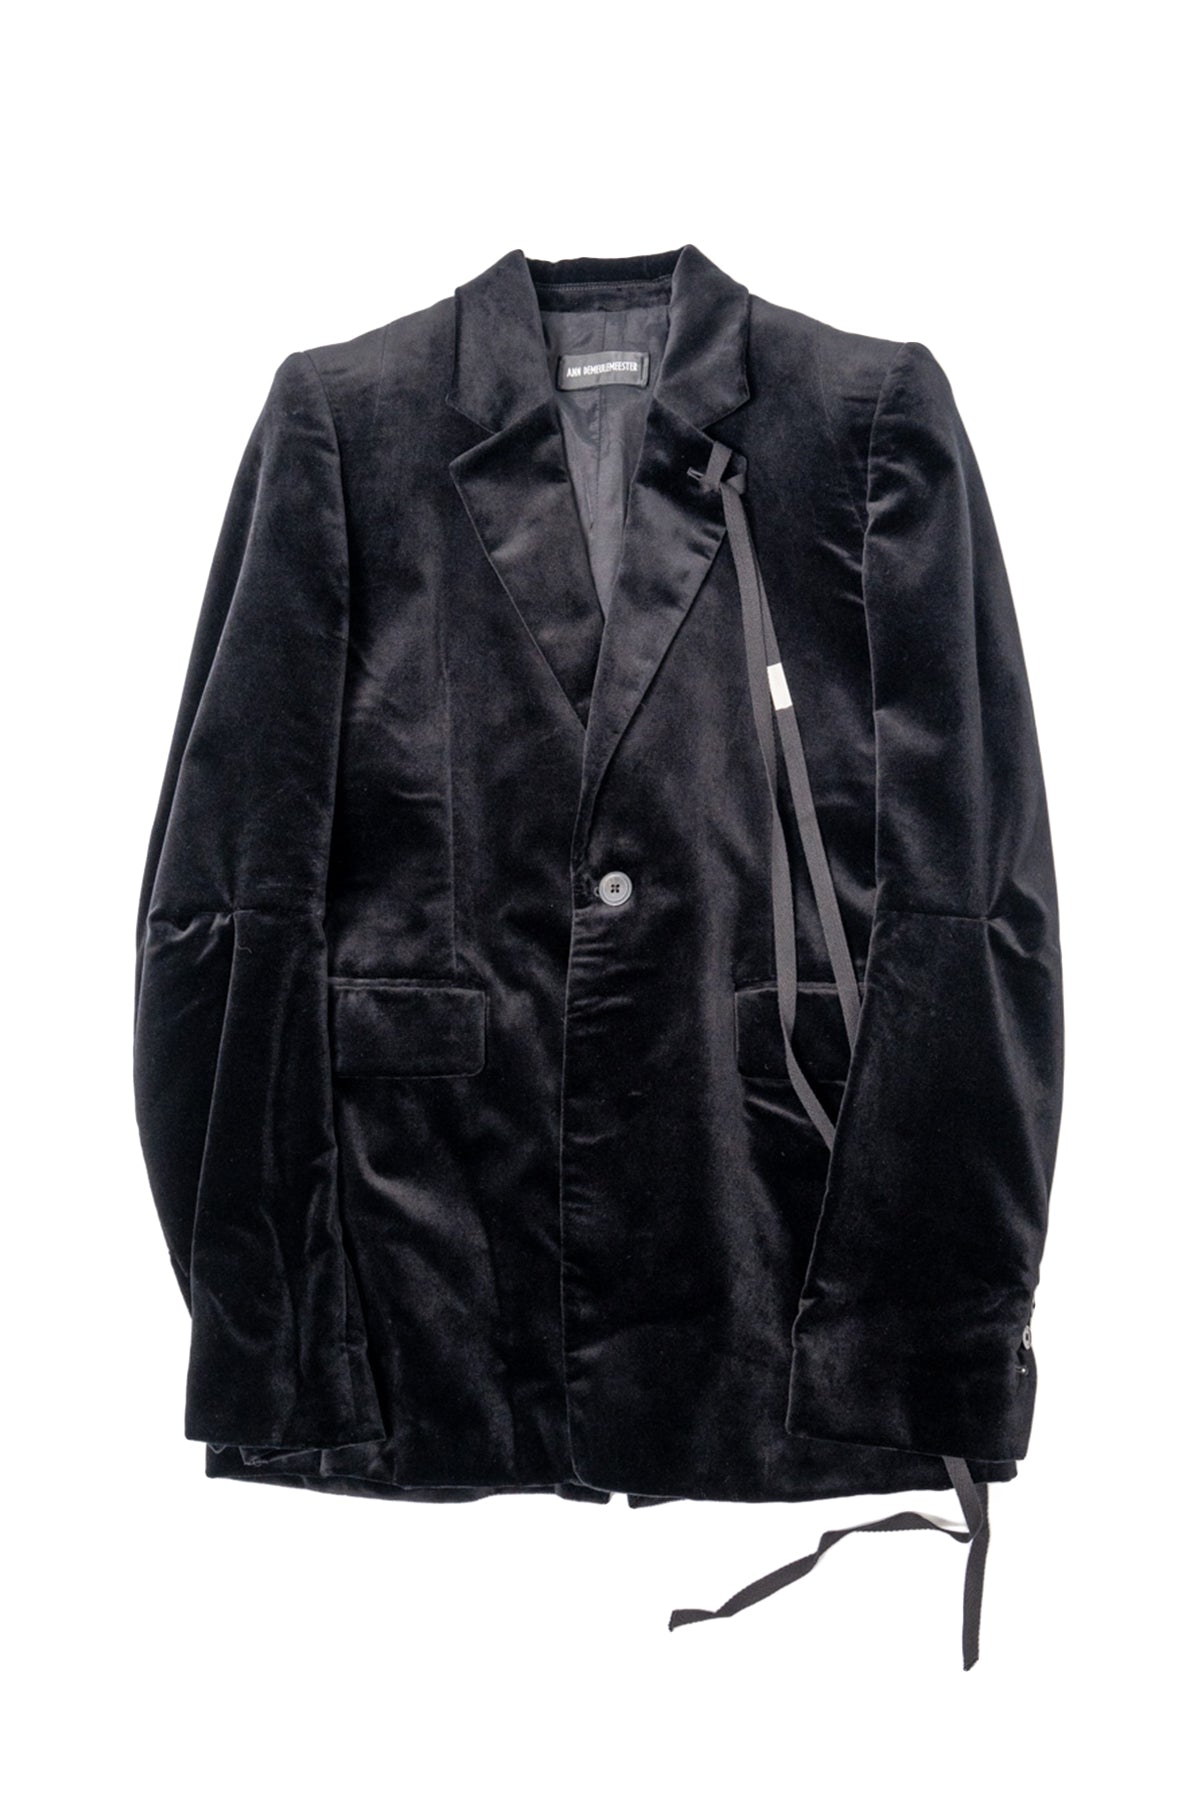 EDMUND FITTED TAILORED JACKET